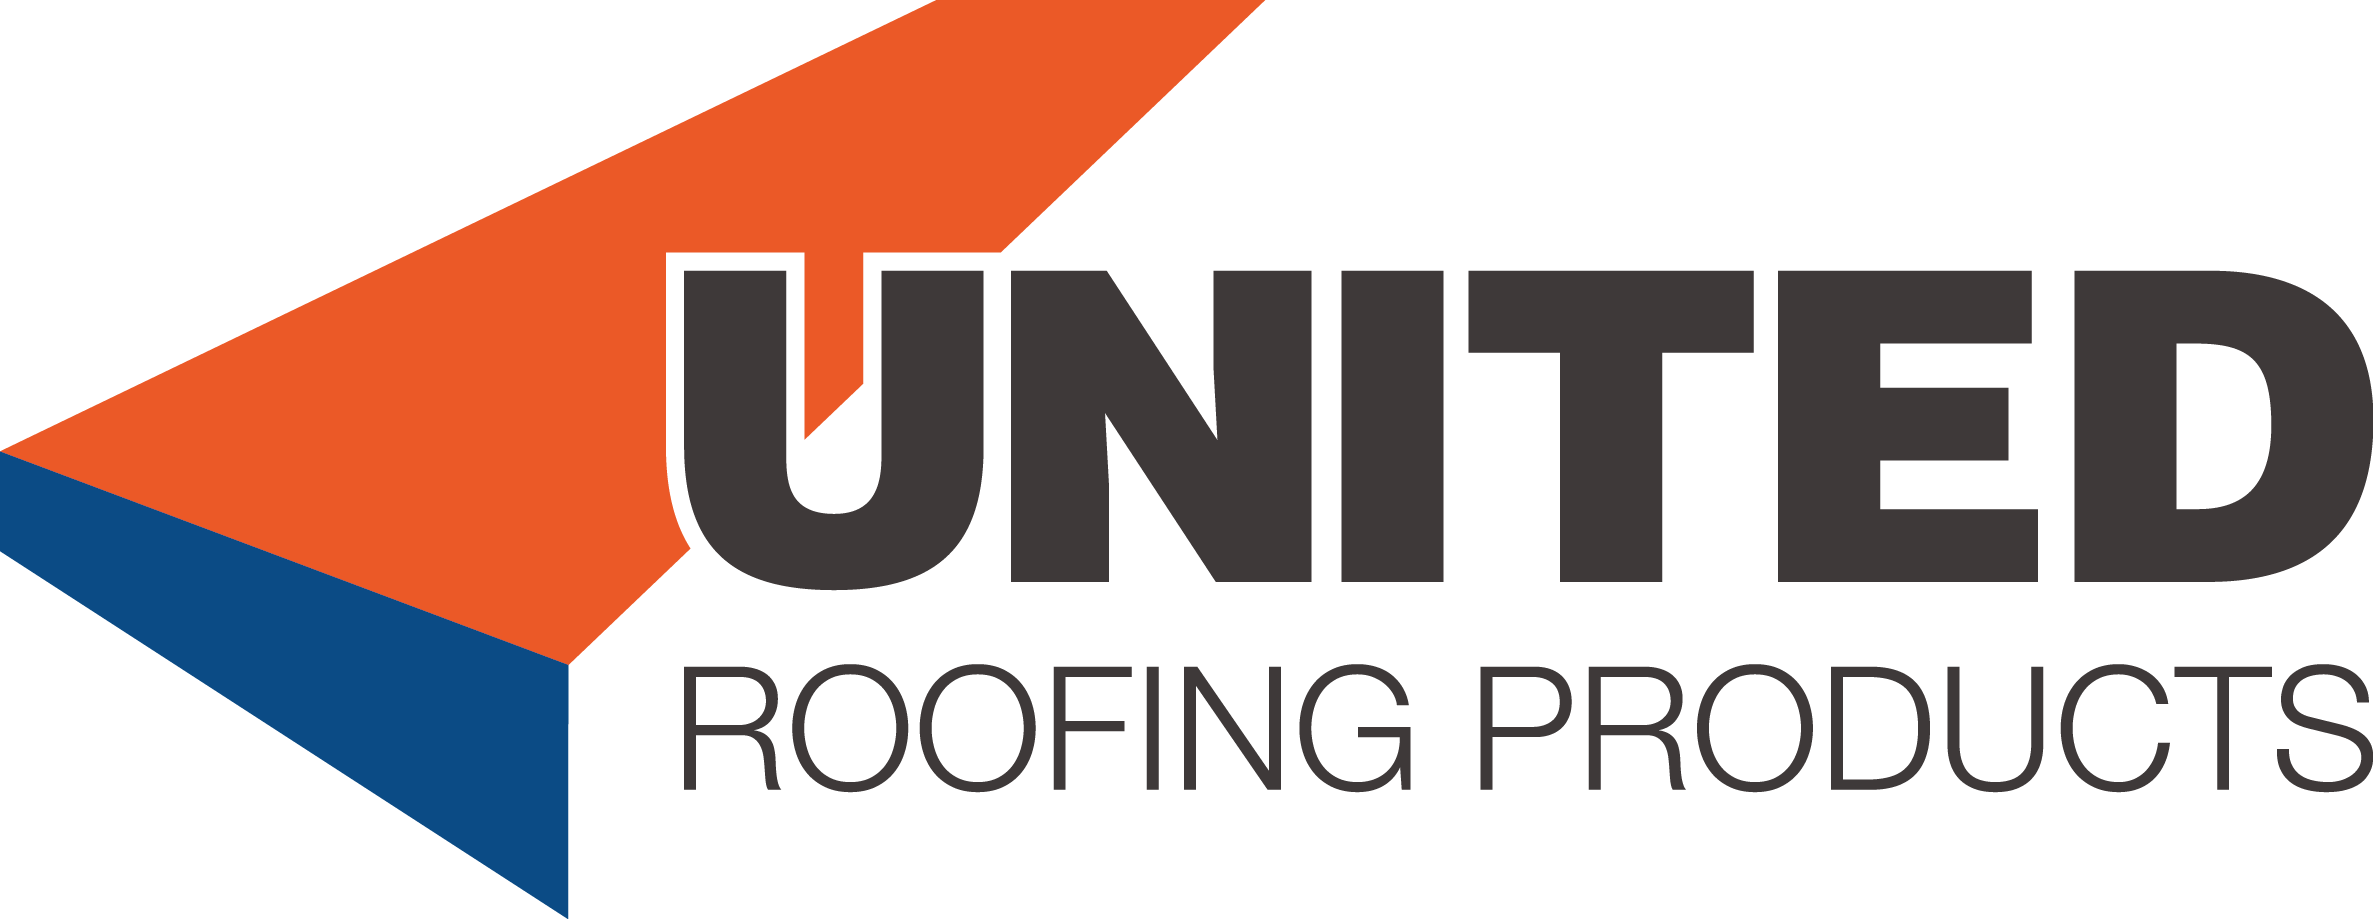 United Roofing Products roof cladding manufacturer